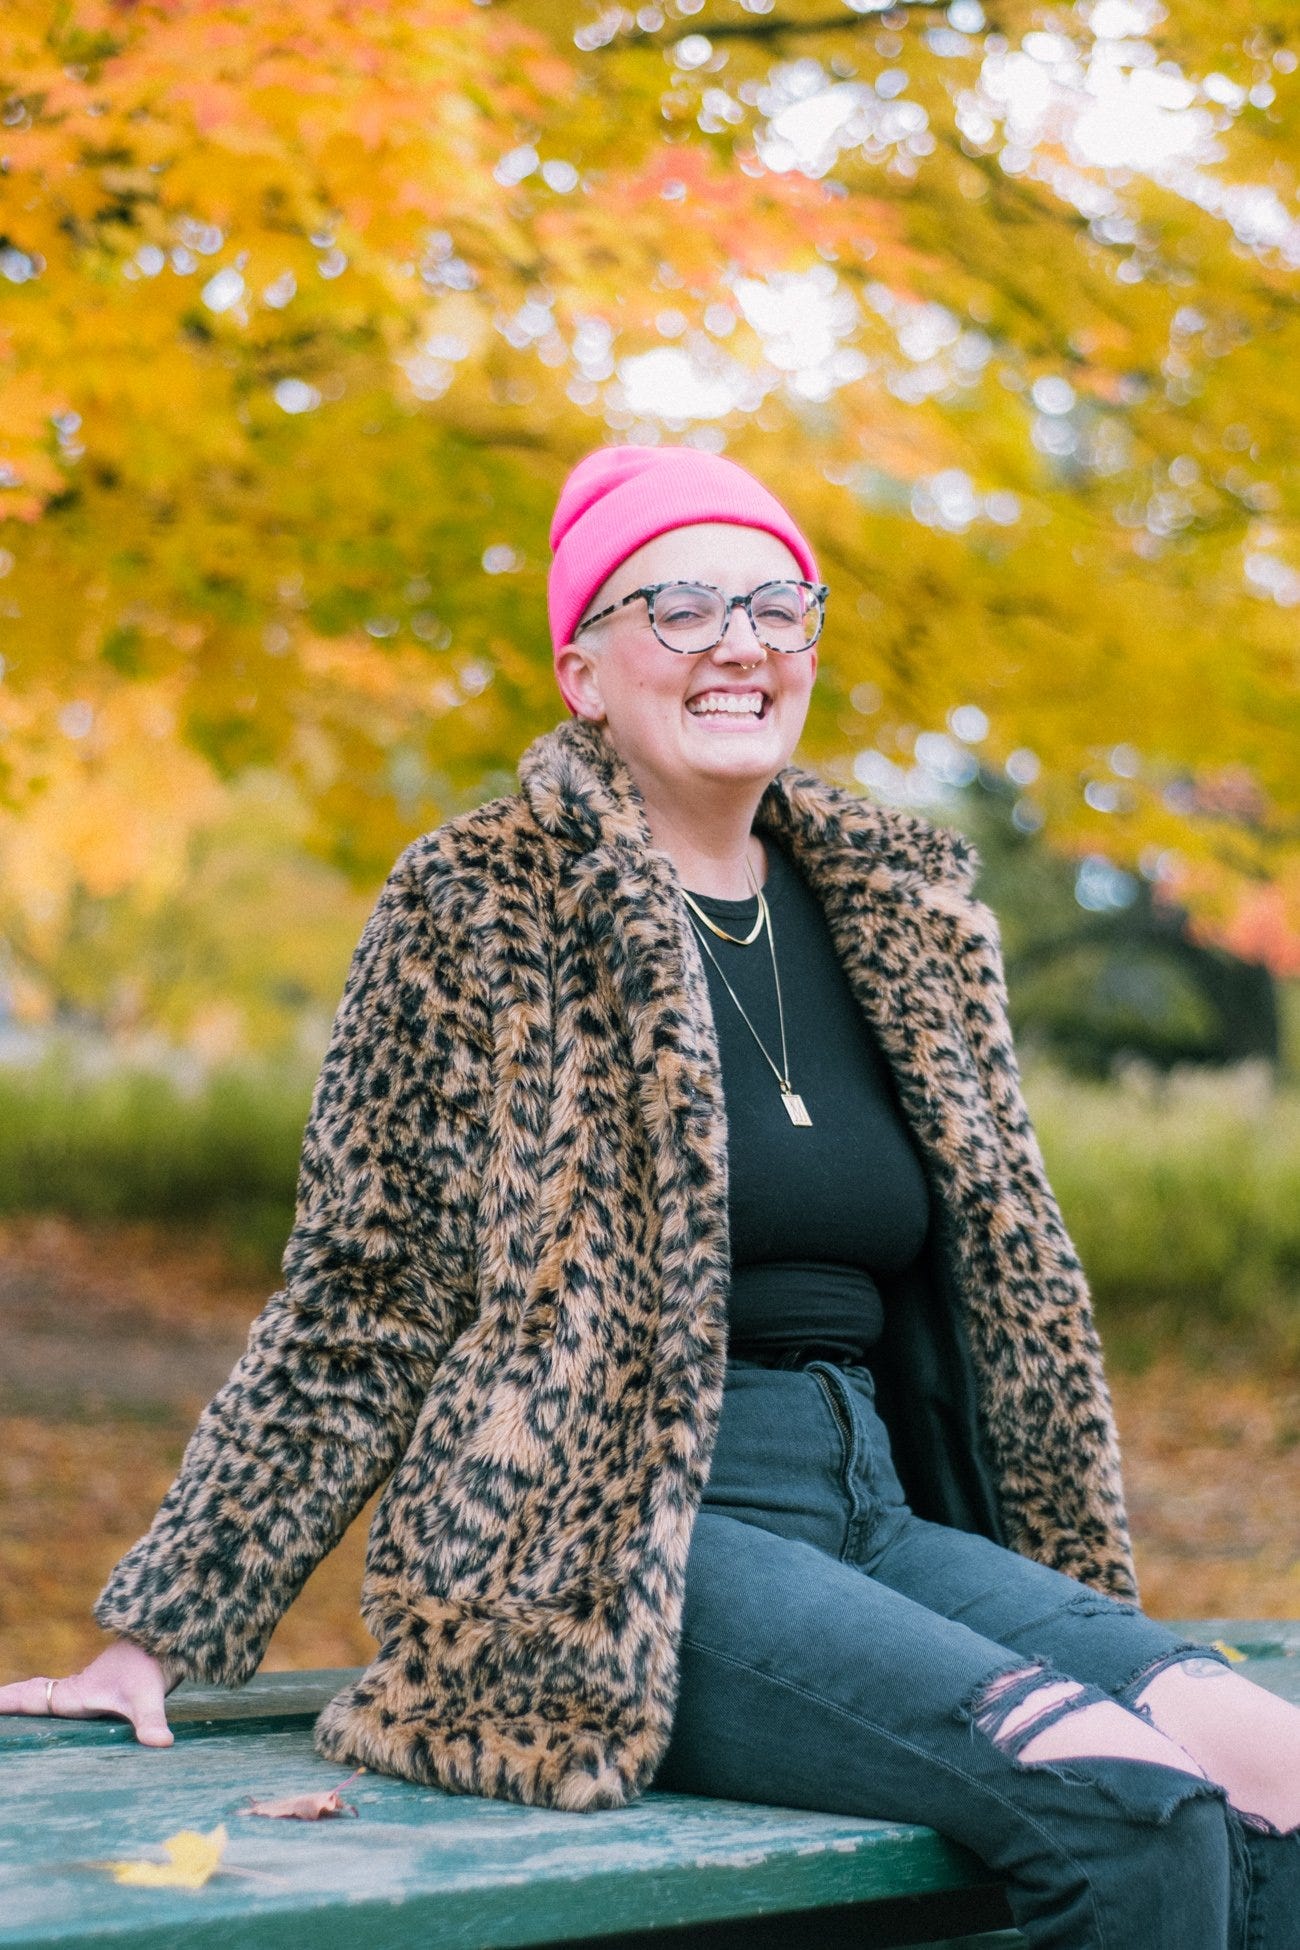 A professional portrait of Maia smiling wide outside in a park with orange and red autumn trees in the background, wearing glasses, a pink toque, and leopard print jacket.